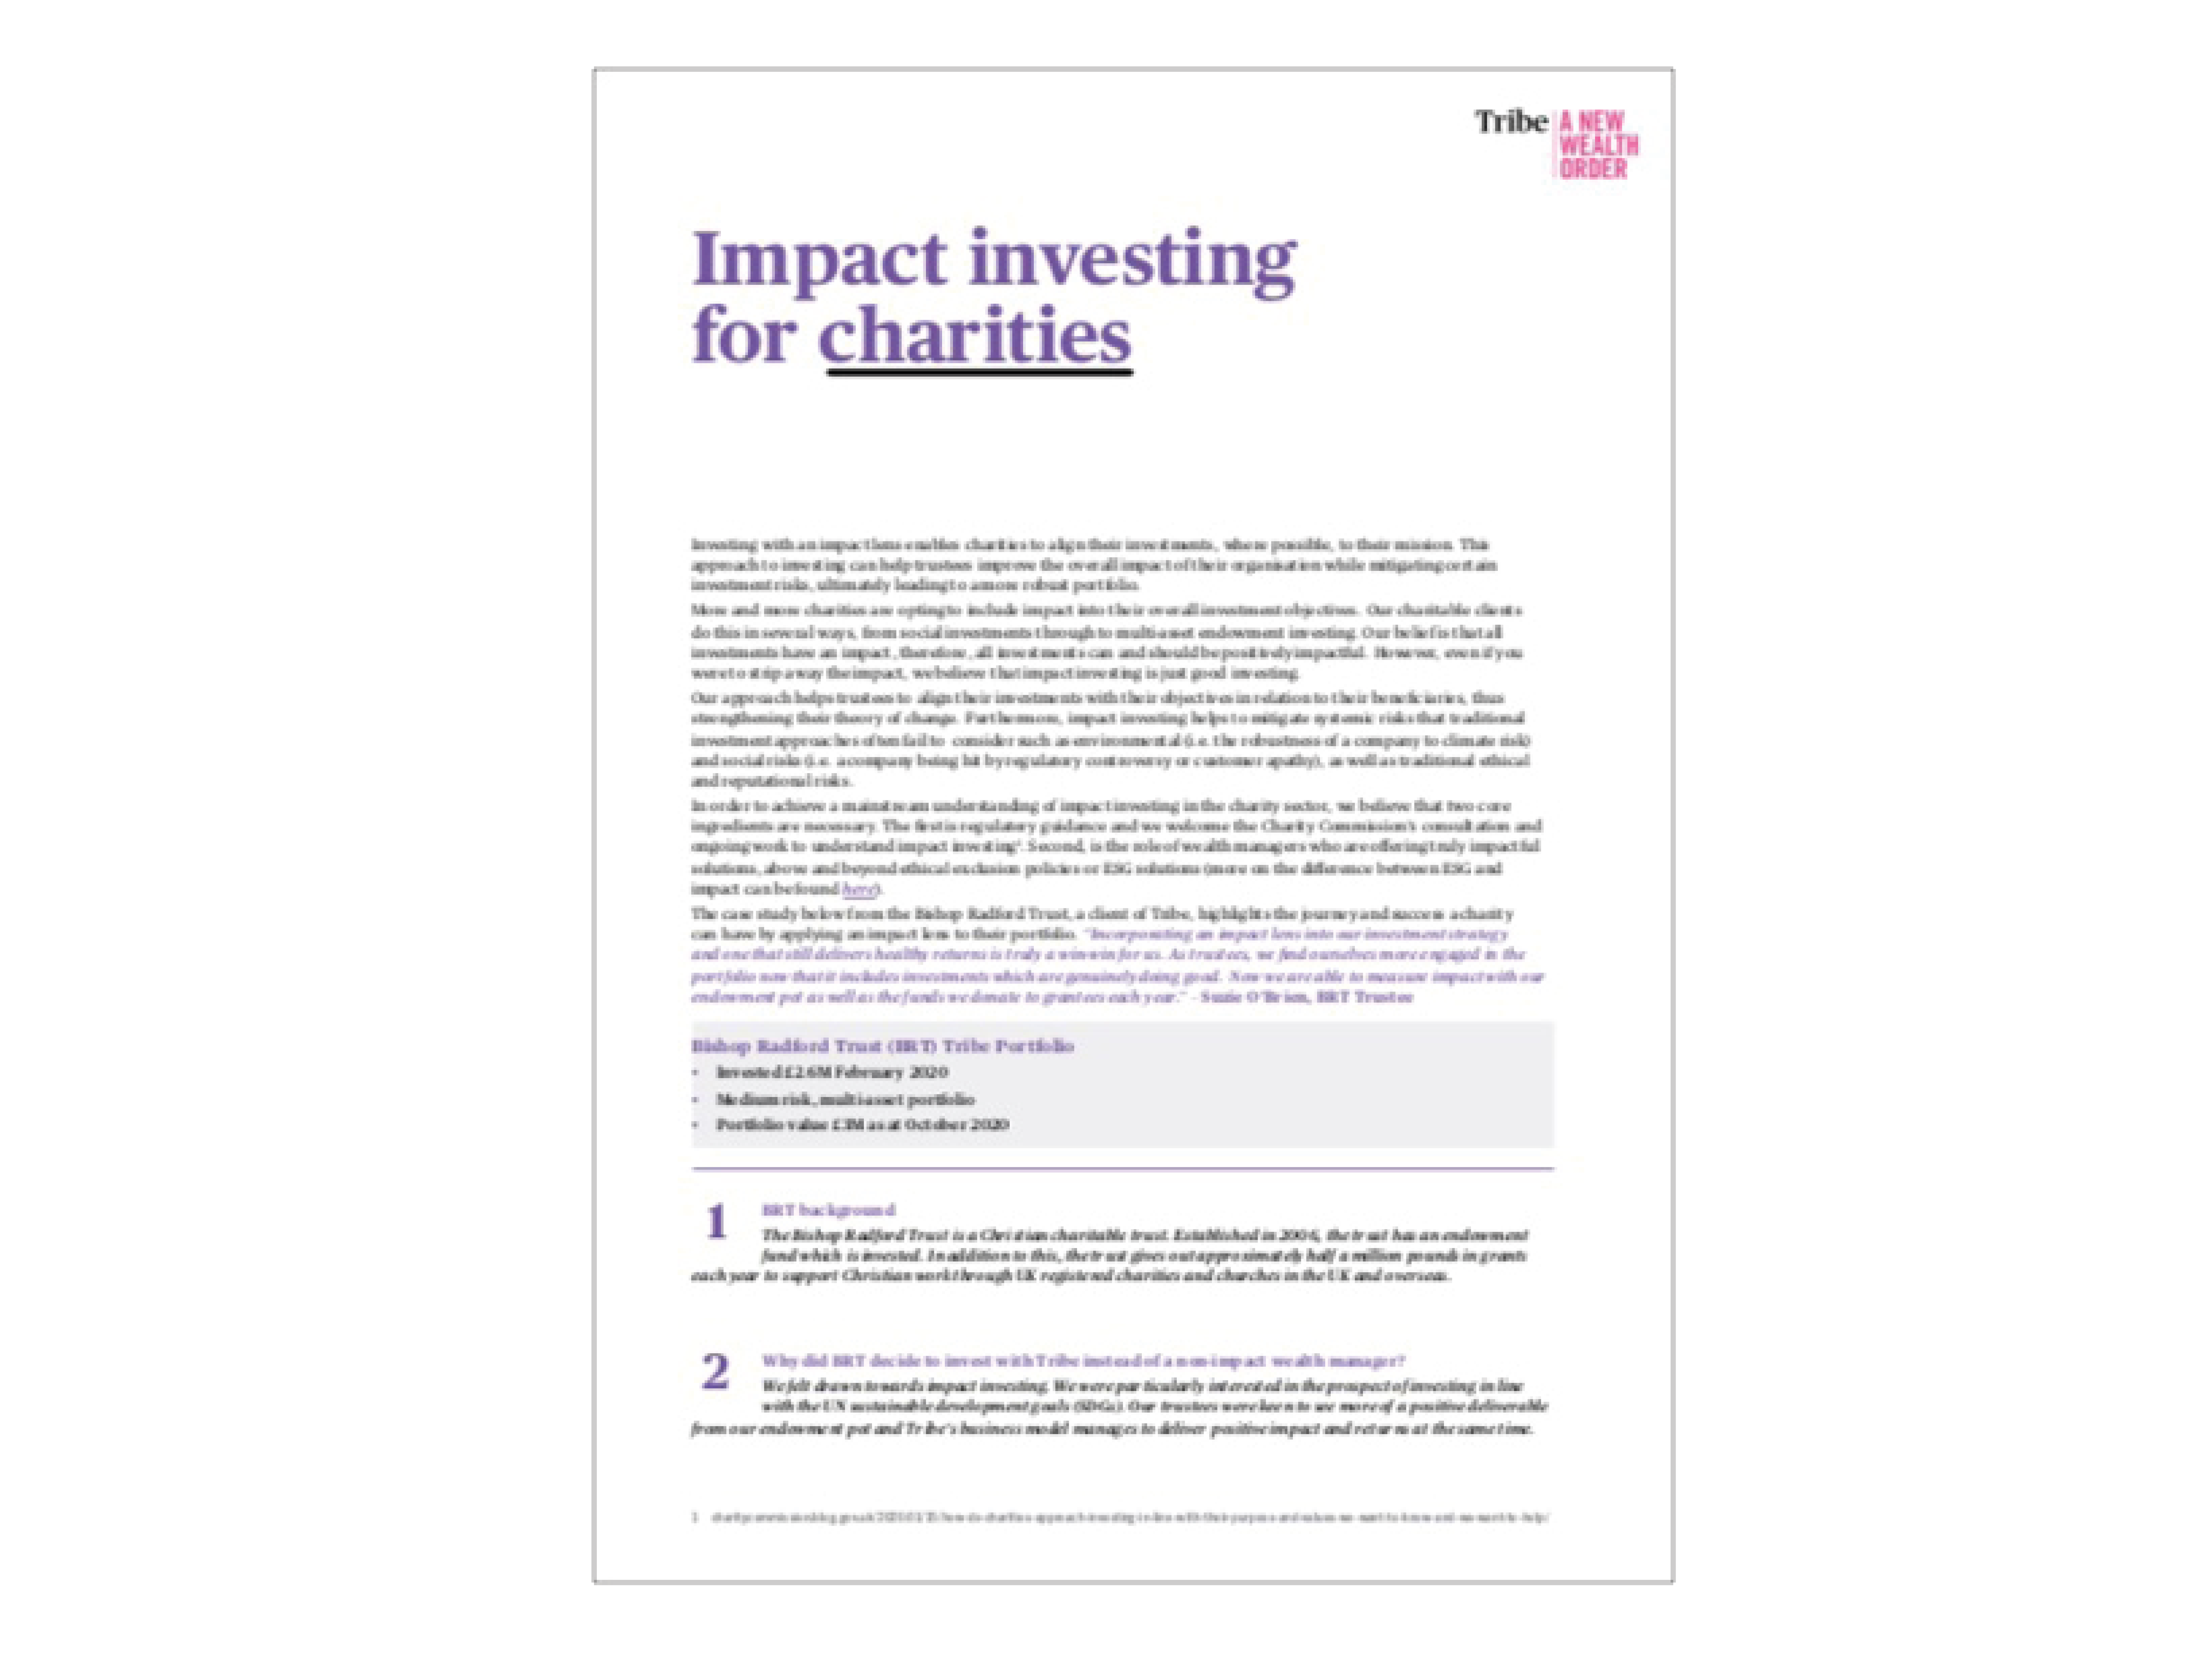 Impact investing for charities